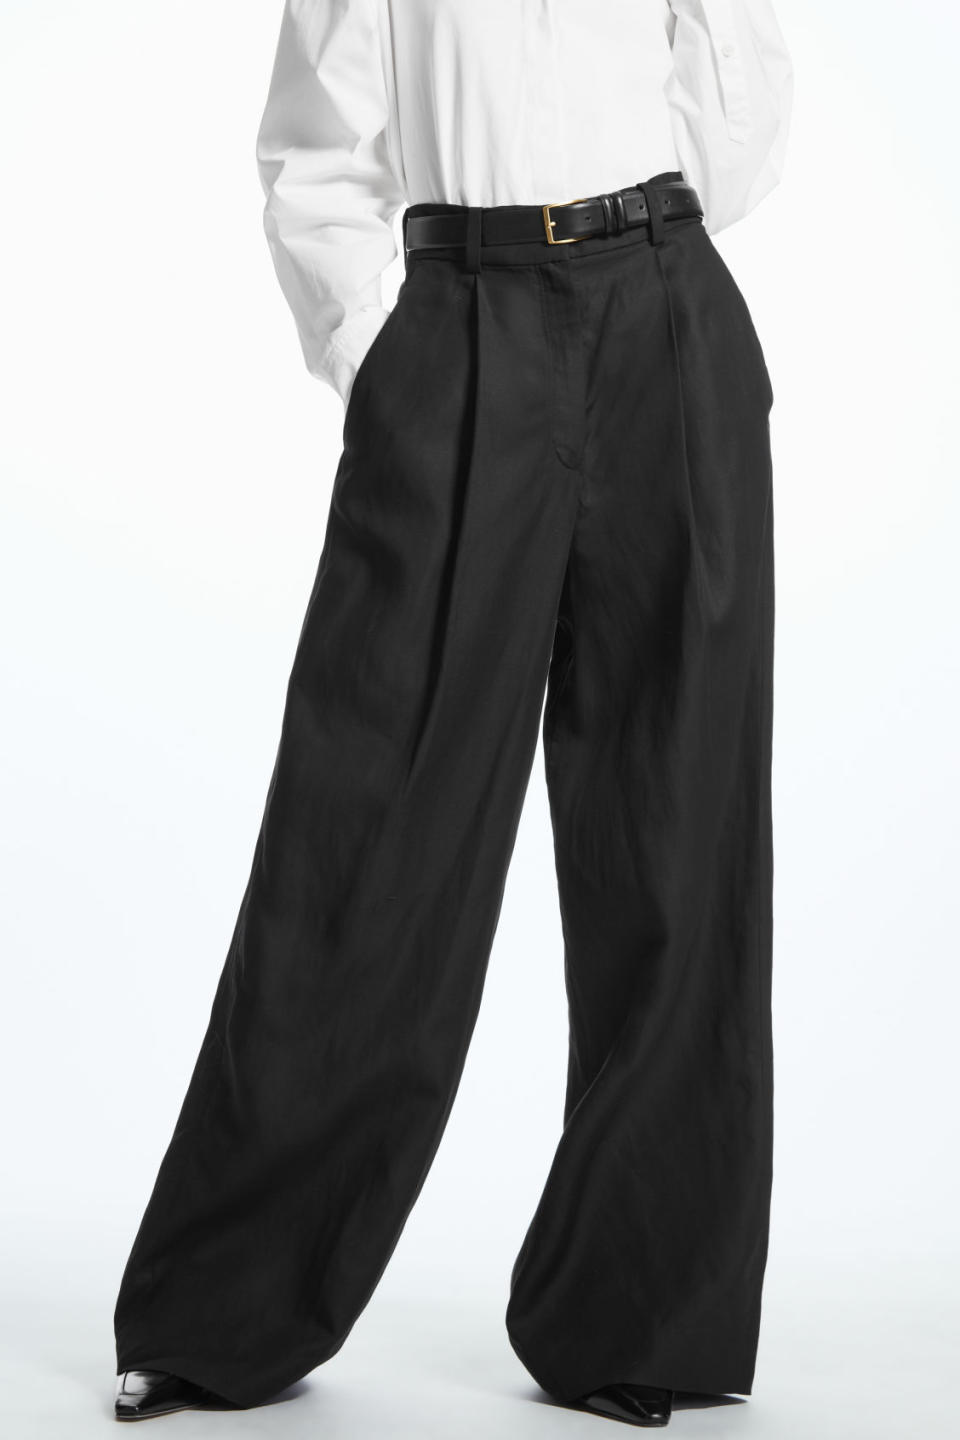 The trousers feature a flattering and elegant wide-leg silhouette. (Cos)